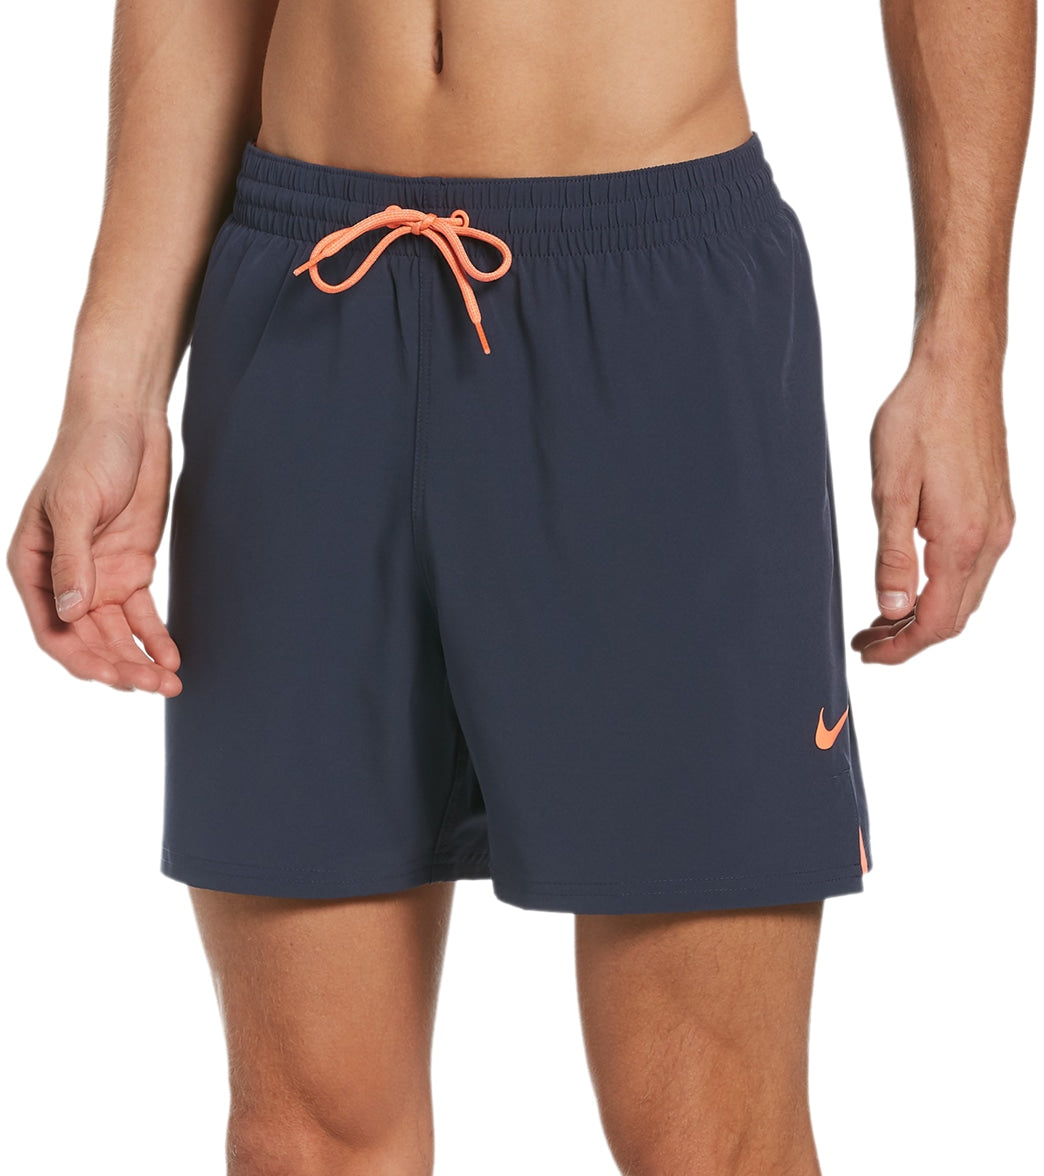 Nike Men's 16 Essential Vital Volley Short - Thunder Blue Small Polyester - Swimoutlet.com